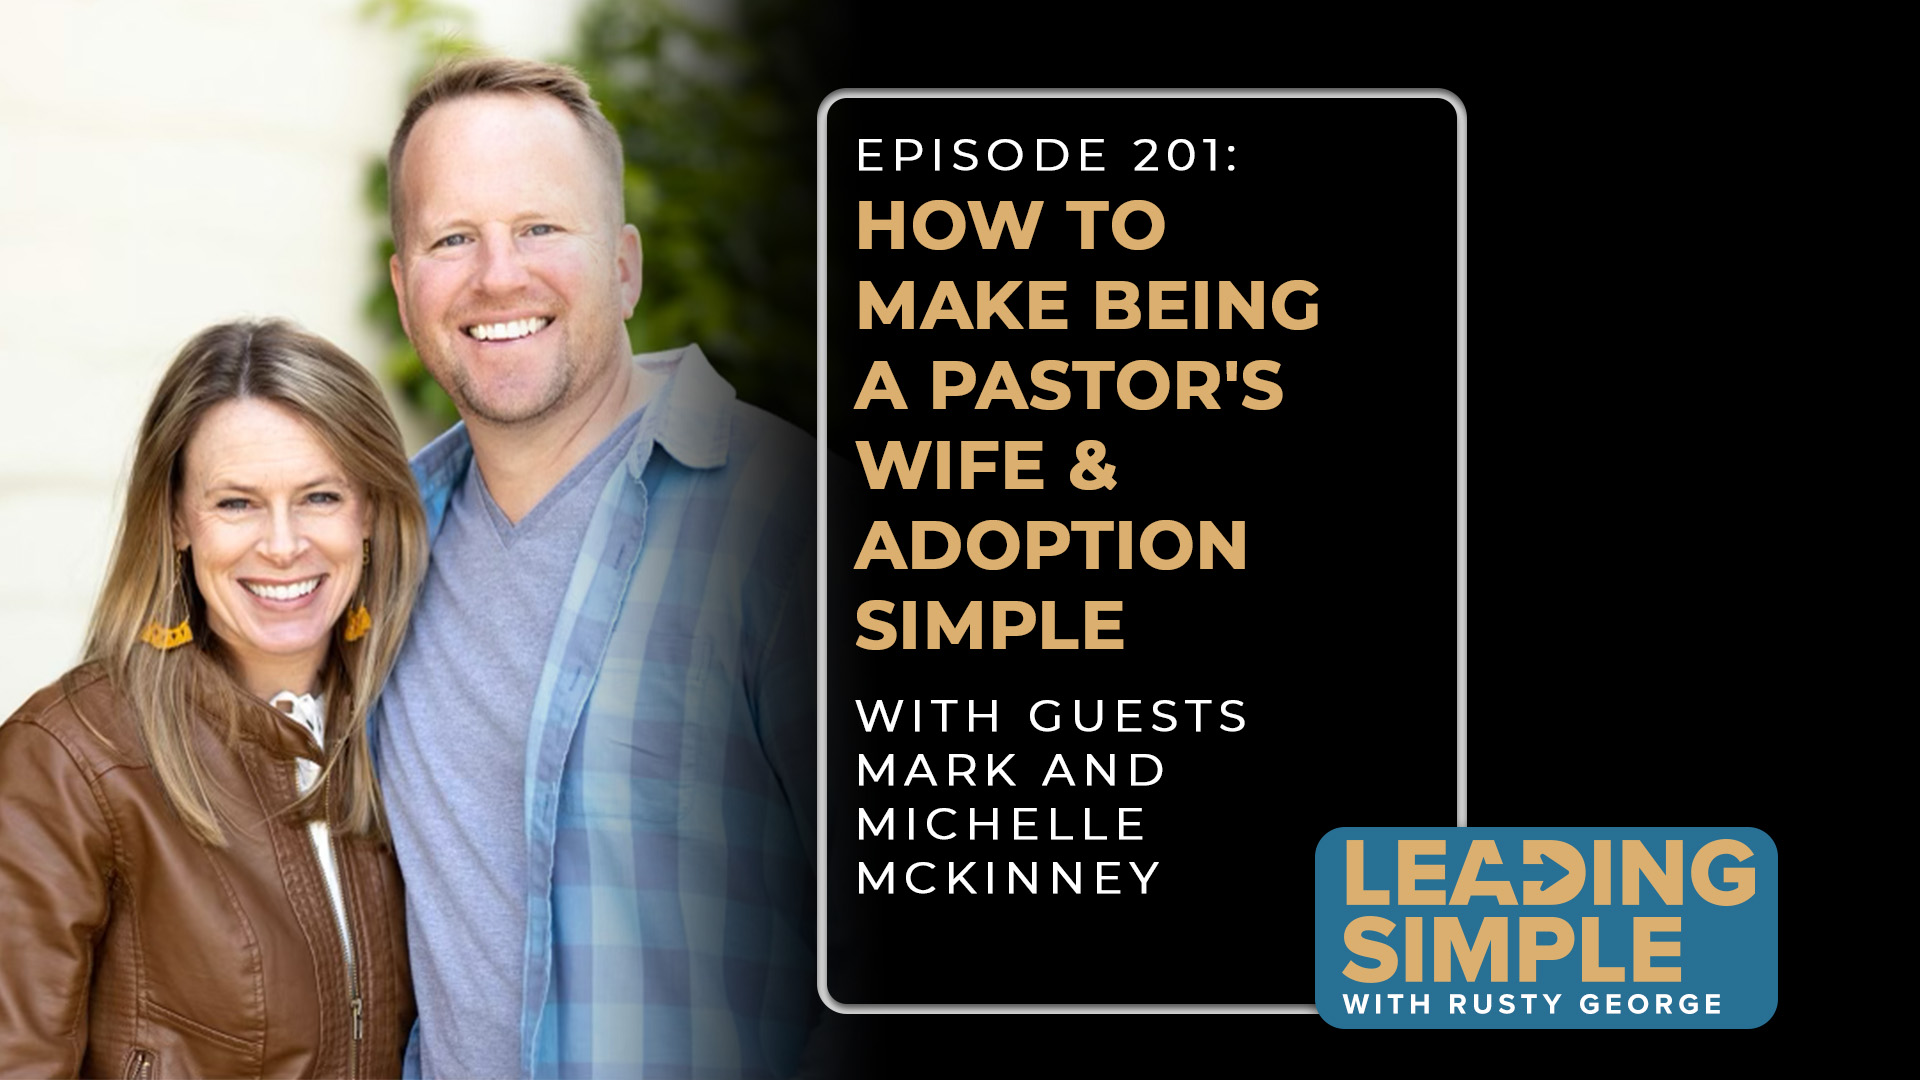 Episode 201: Mark & Michelle McKinney makes being a pastor's wife and adoption simple…as if!